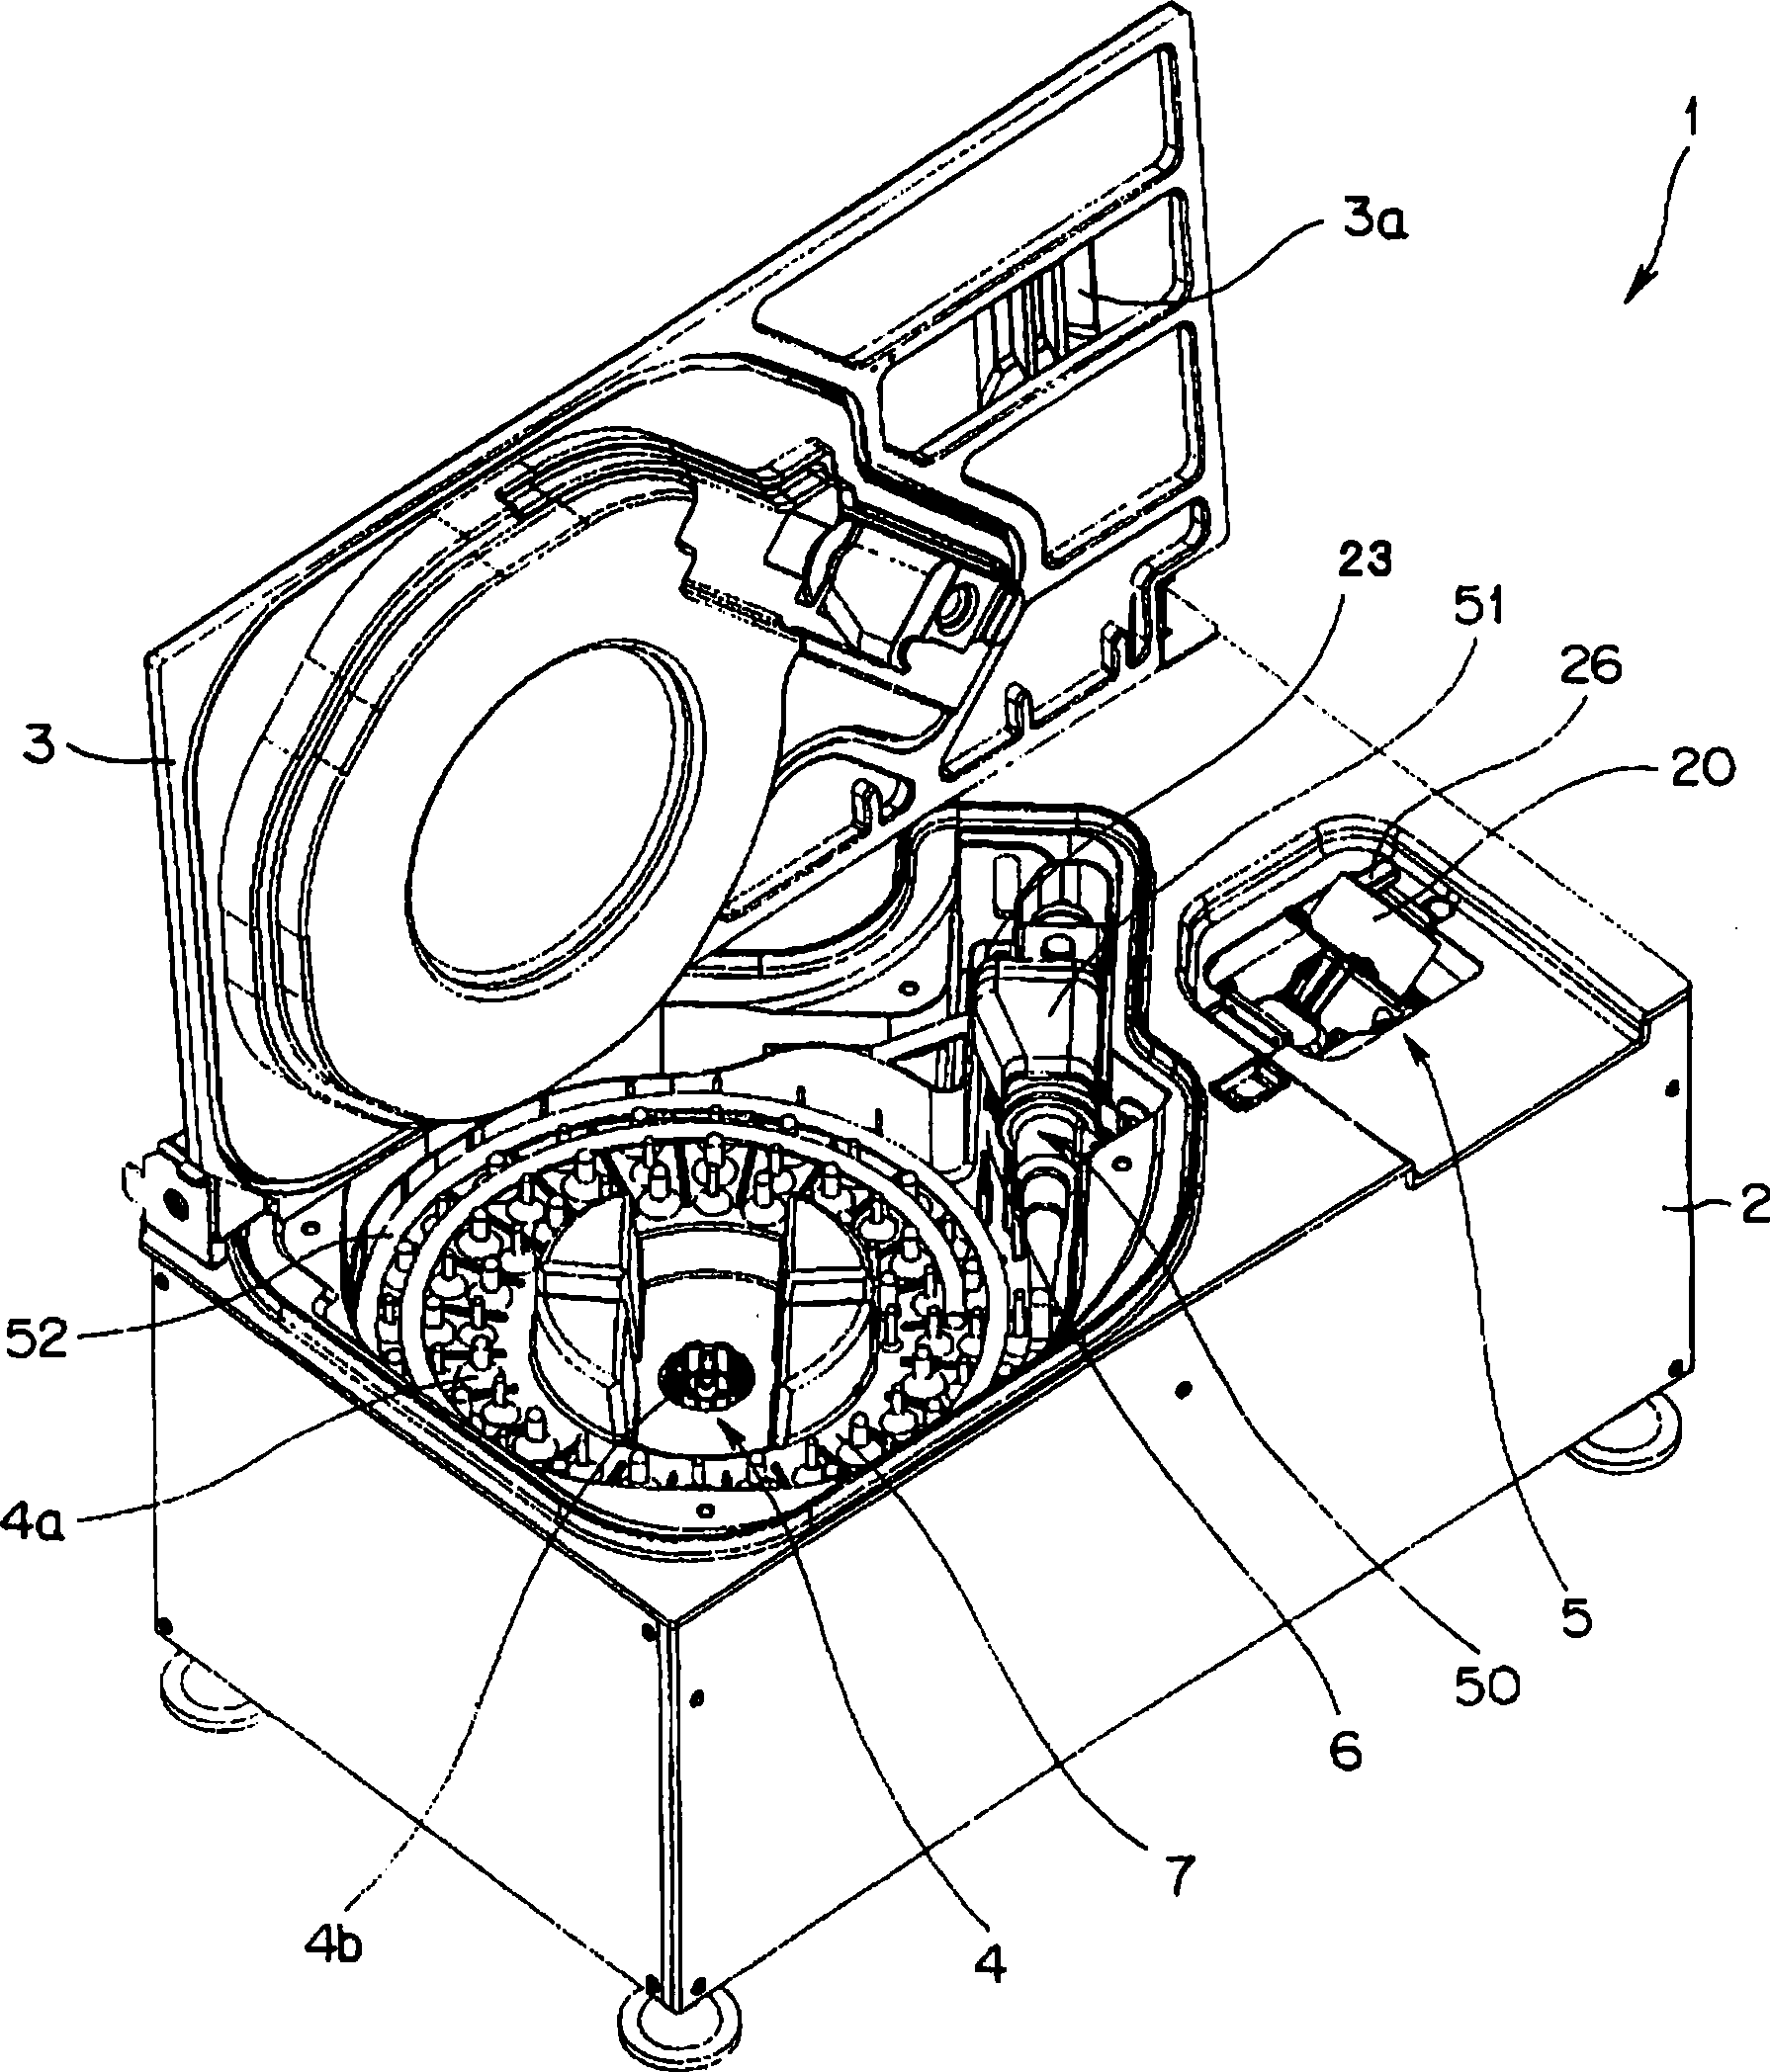 Endoscope washing and disinfecting apparatus and leak detection method performed by the apparatus